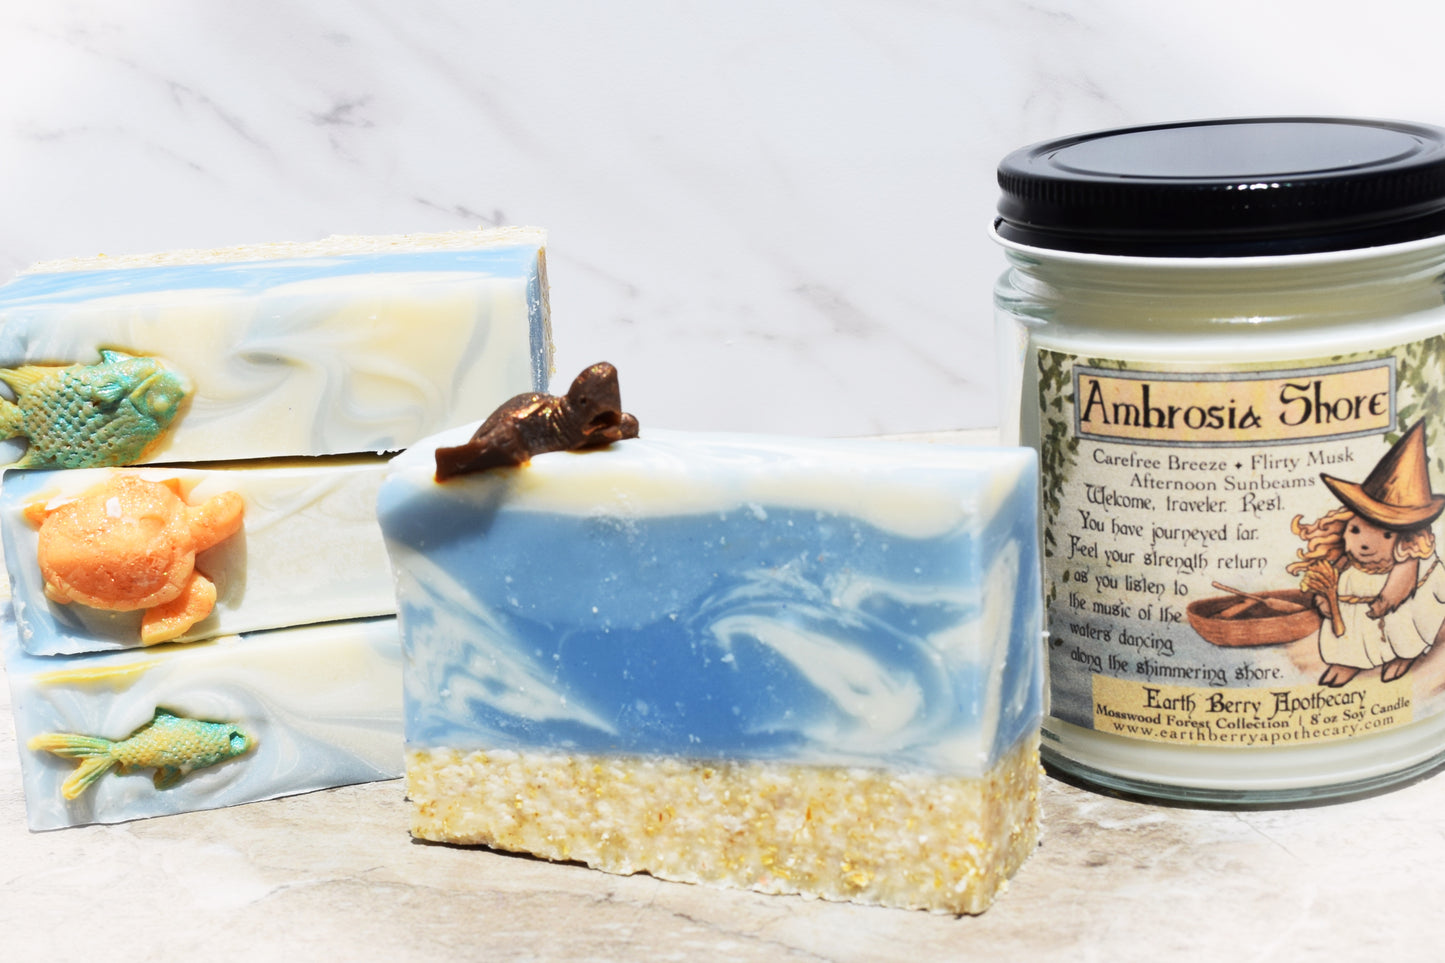 Ambrosia shore ancient Greek themed candle and soap set. Ocean soap. Fantasy themed candles.